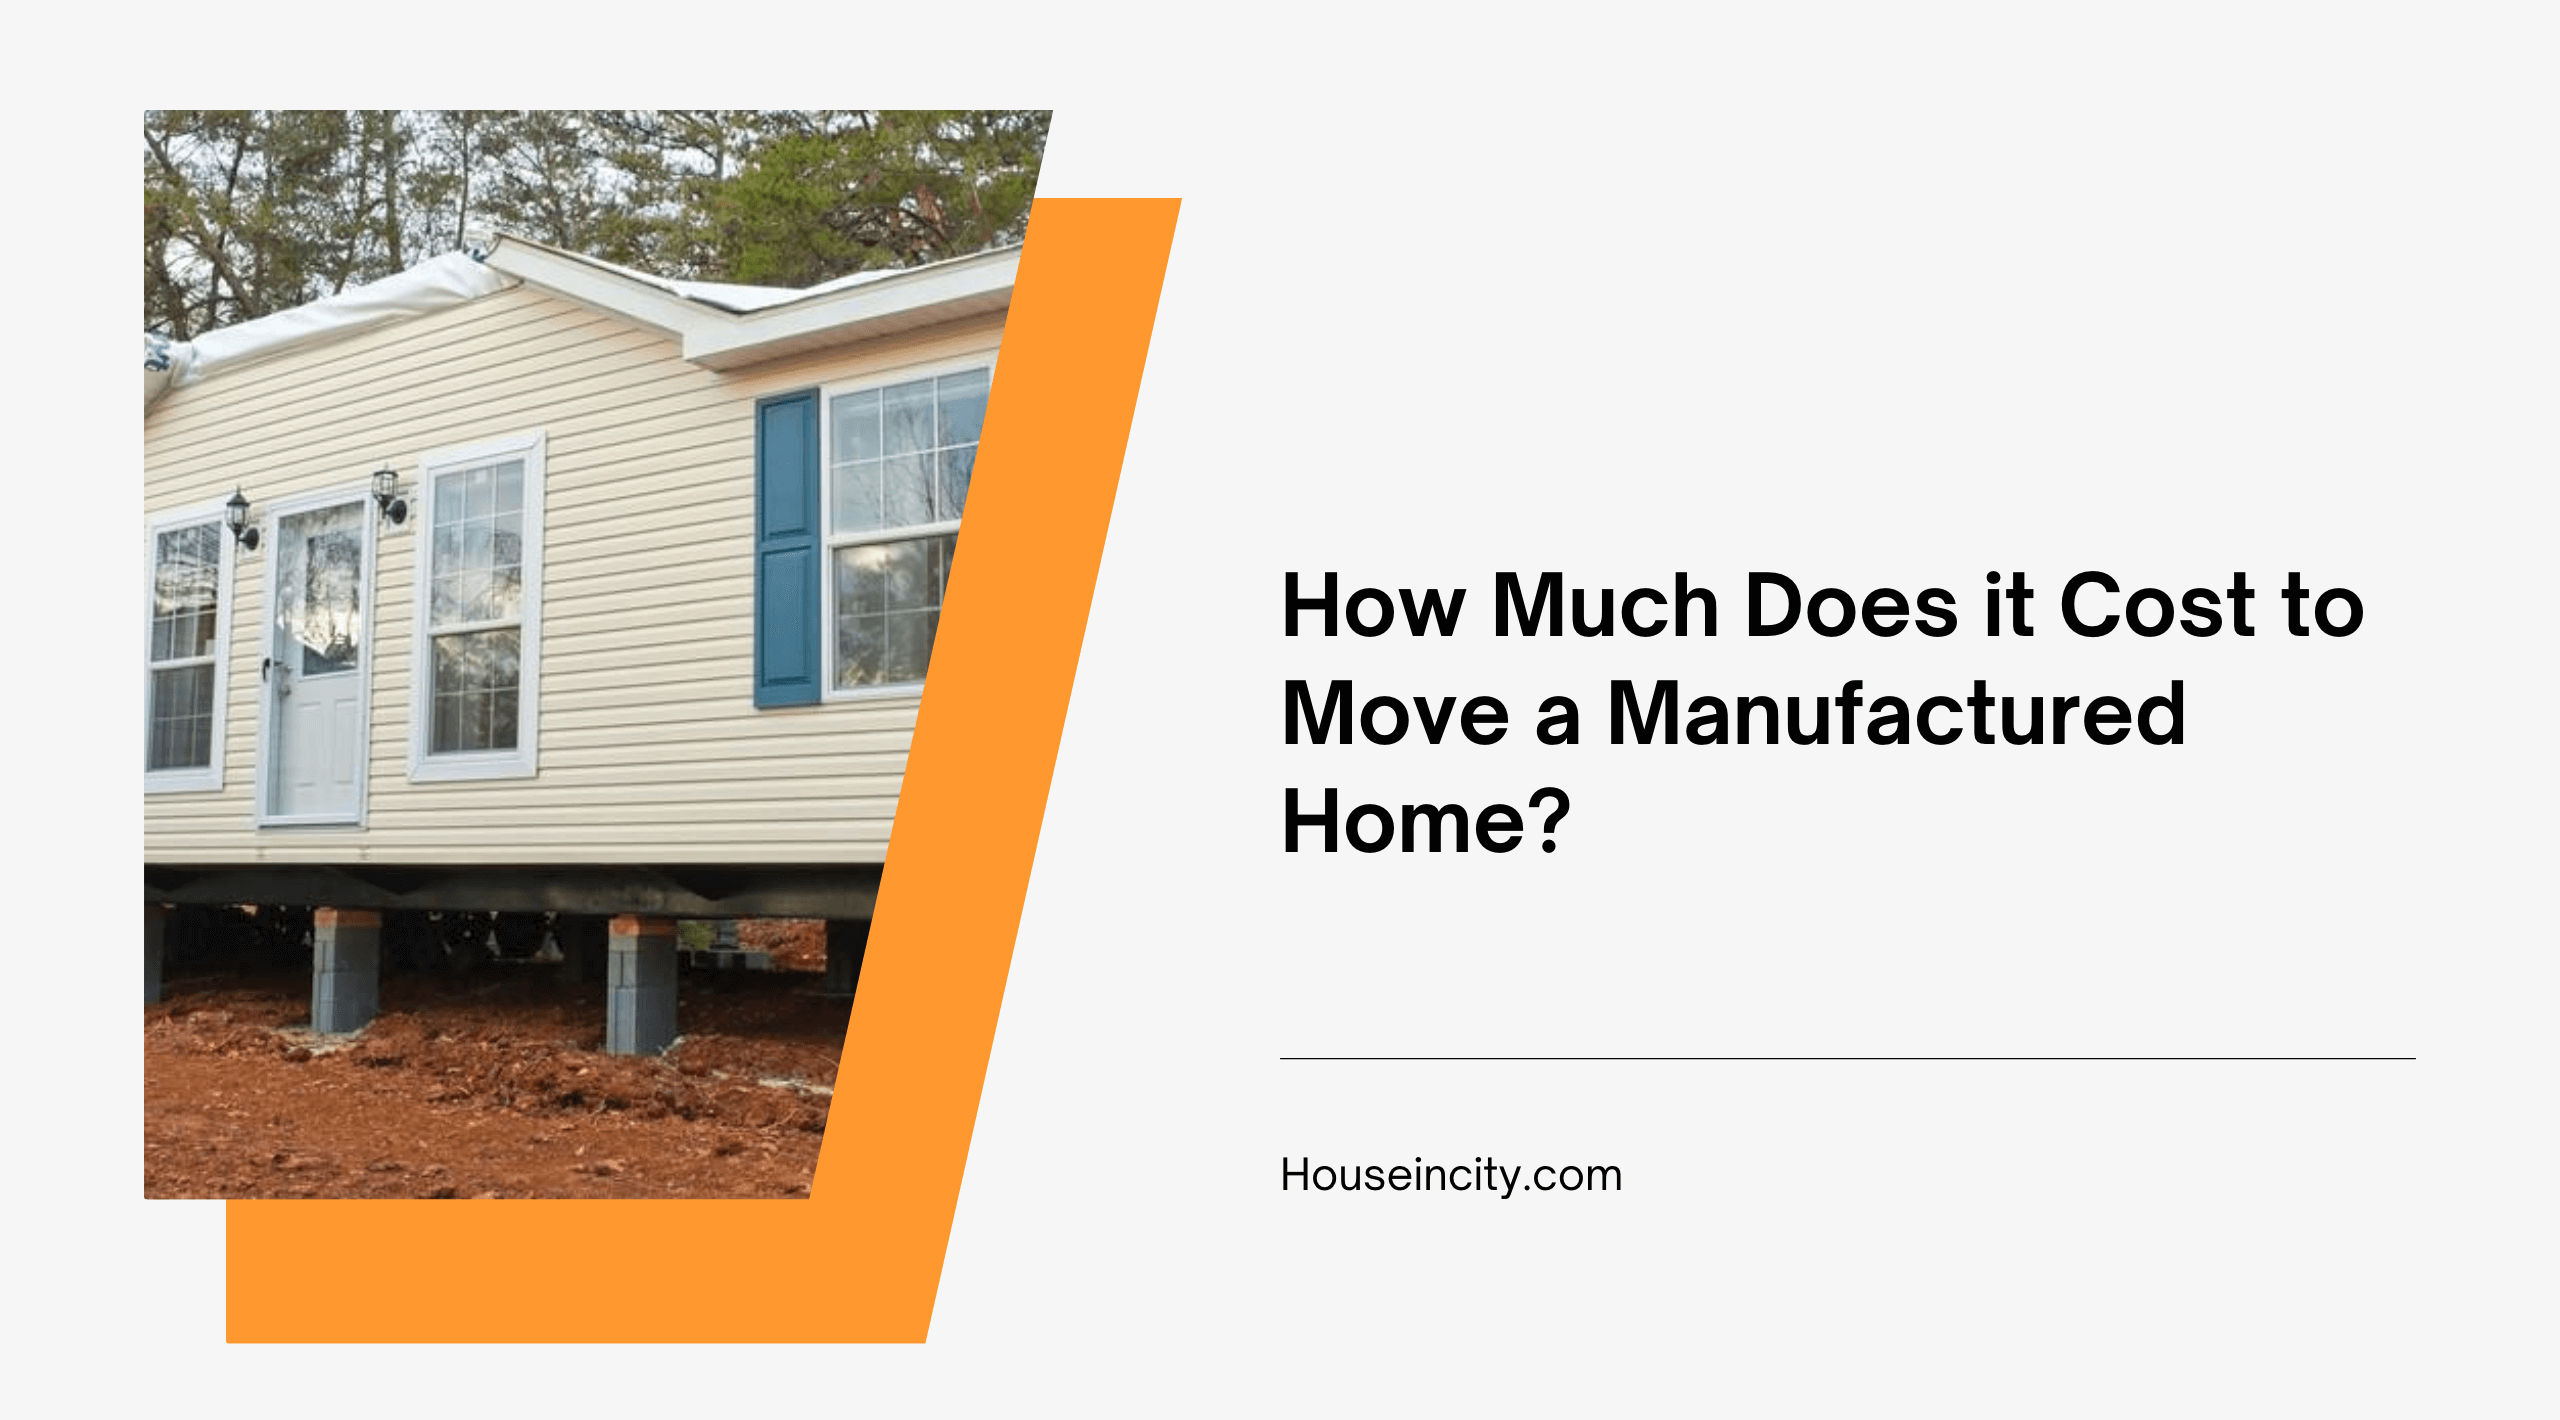 How Much Does it Cost to Move a Manufactured Home?